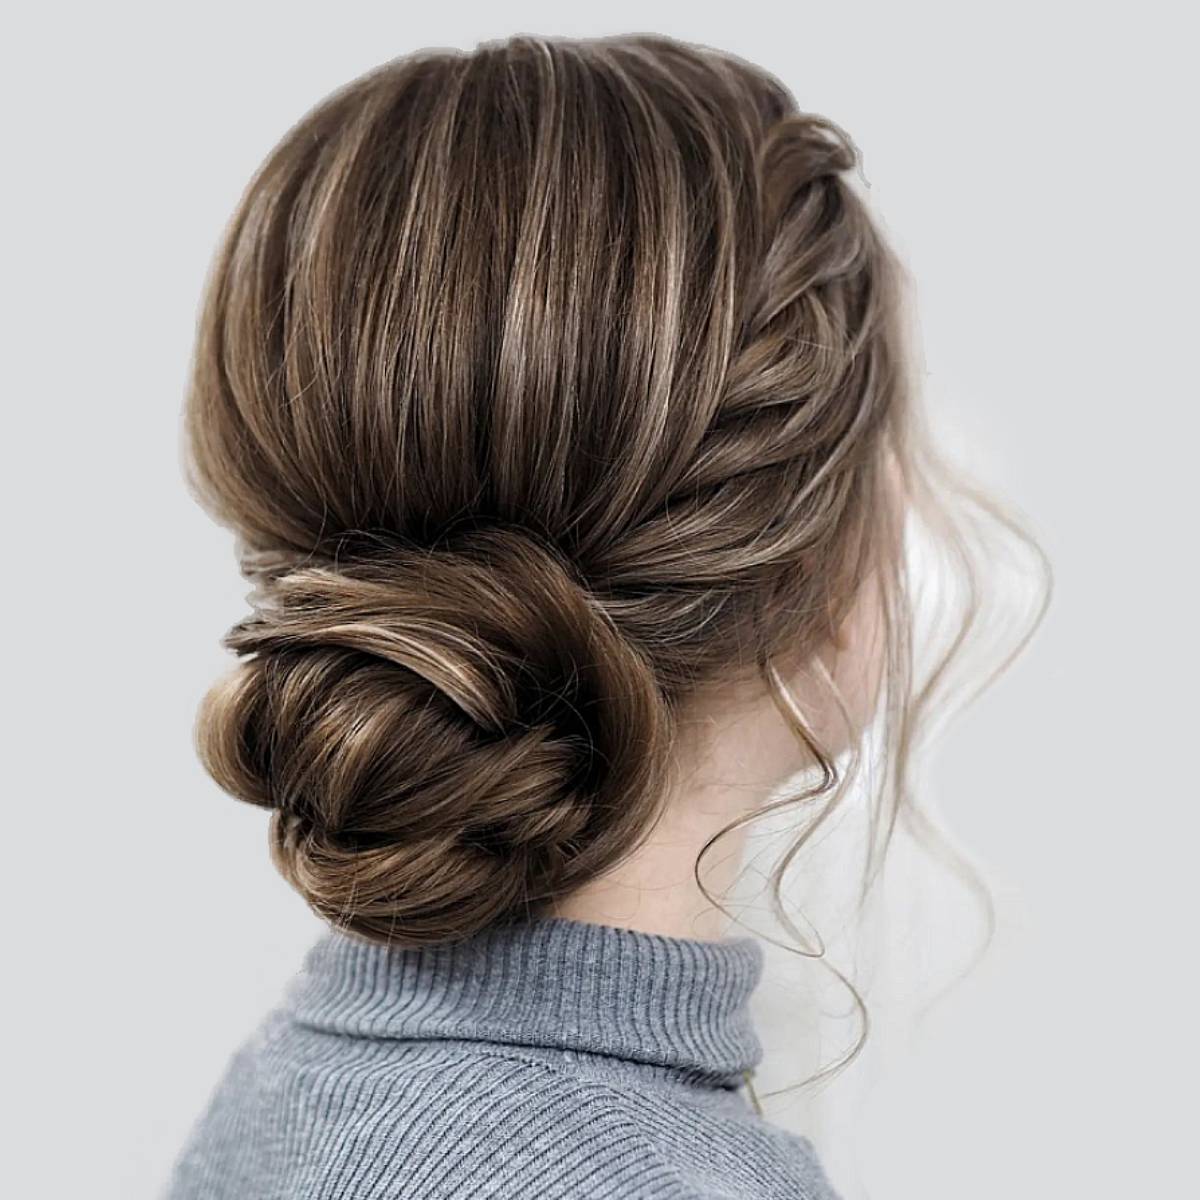 Different Types of Bun Hairstyles - With Photos